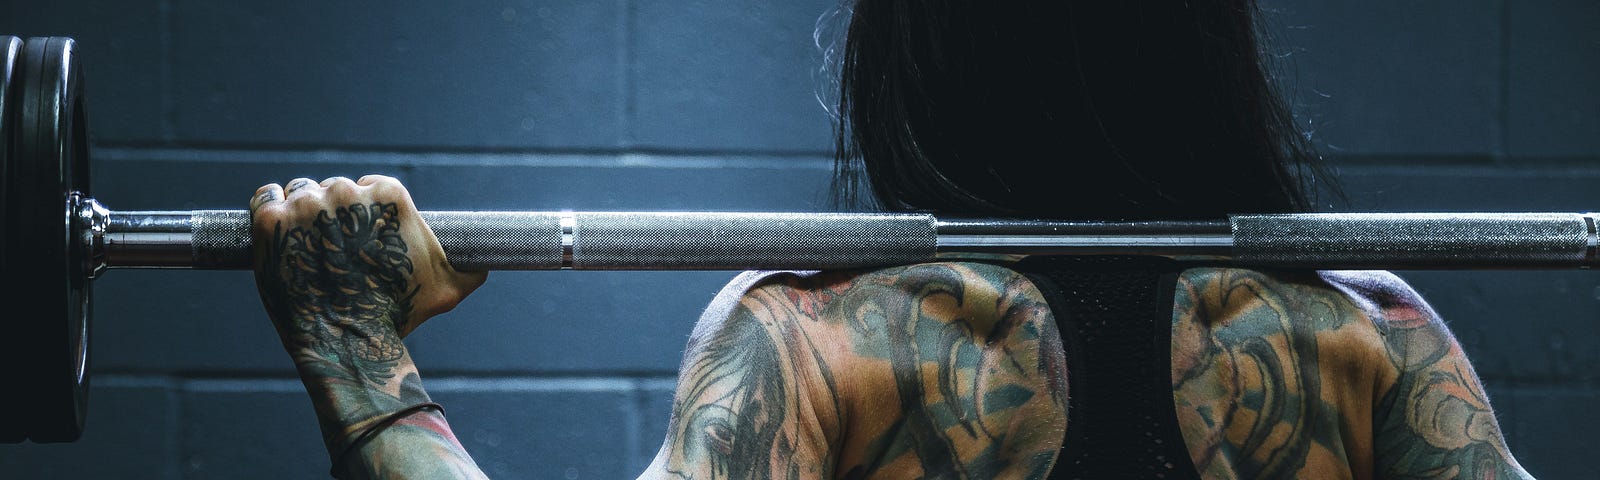 The back of a strong, tattooed woman lifting weights at a gym